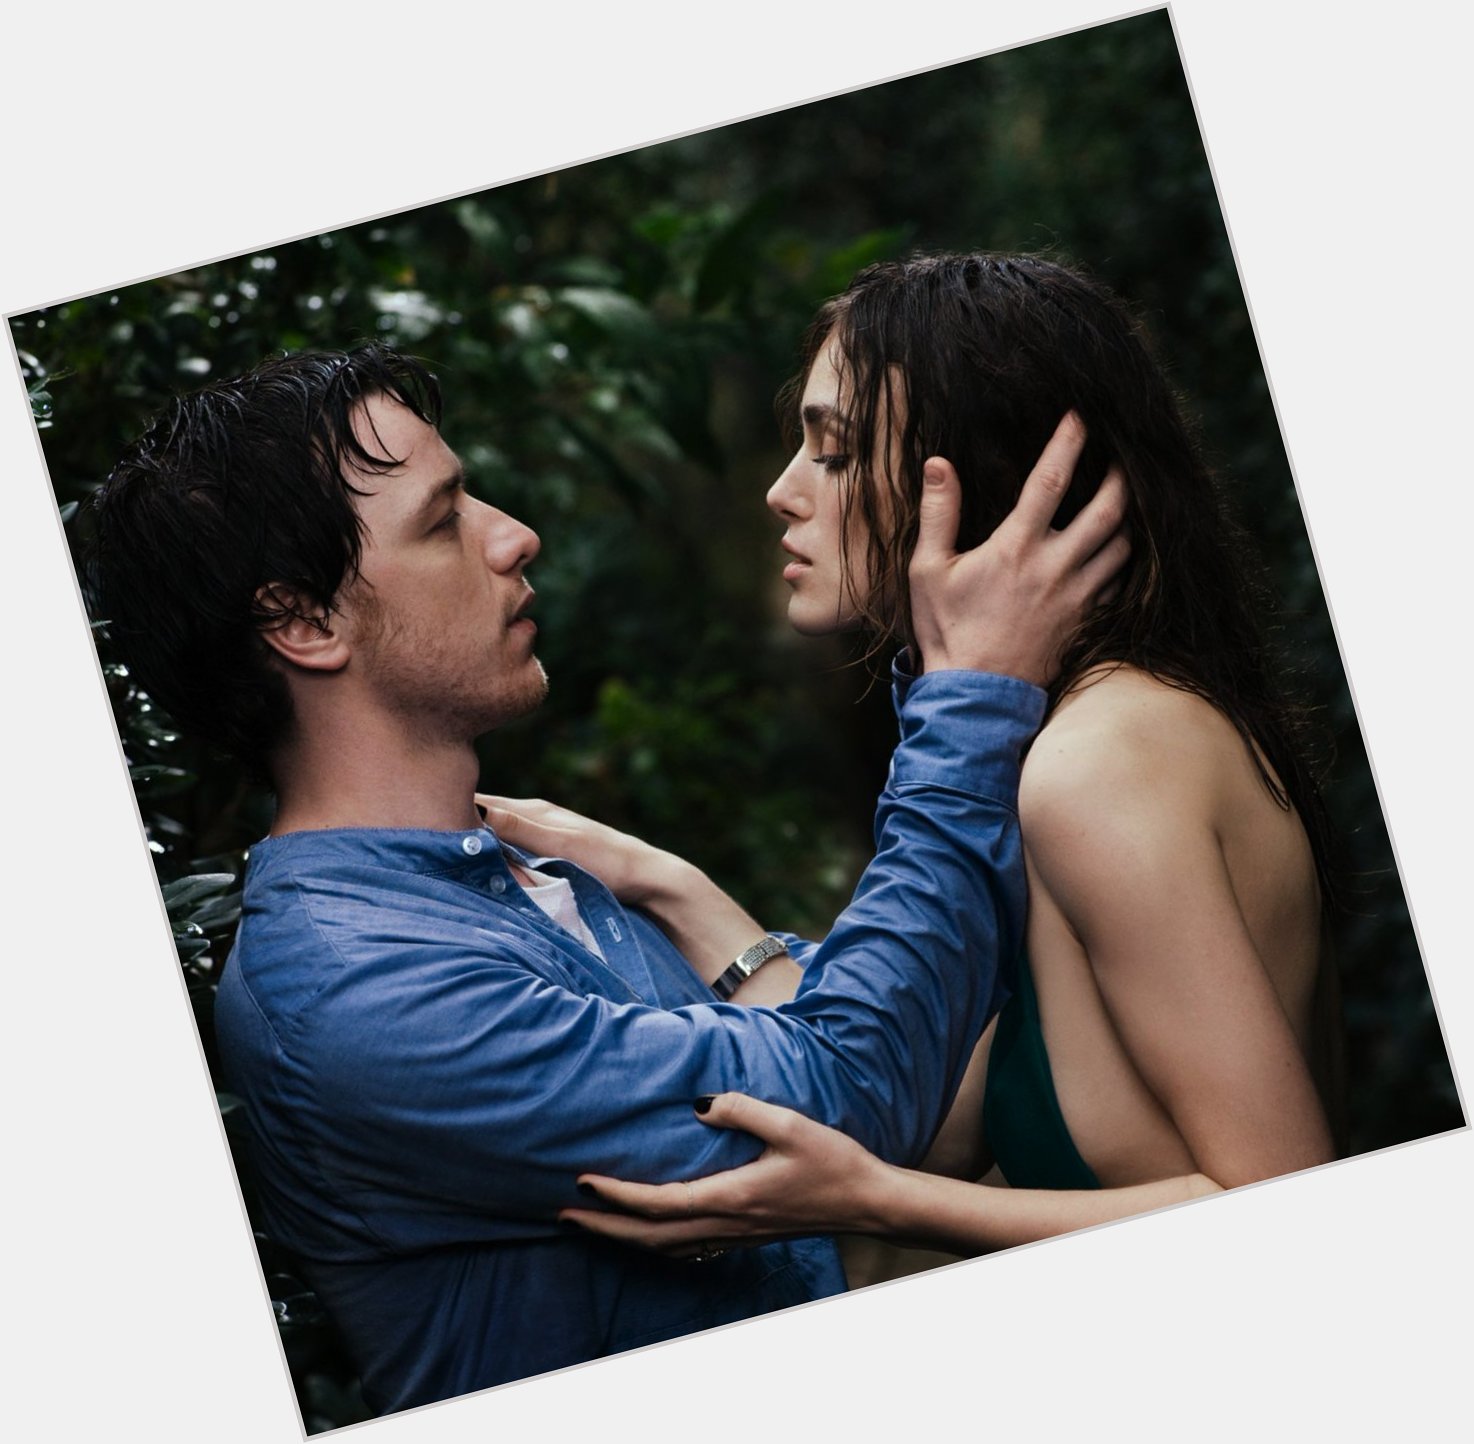 Happy birthday to keira\s co-star and friend james mcavoy! 